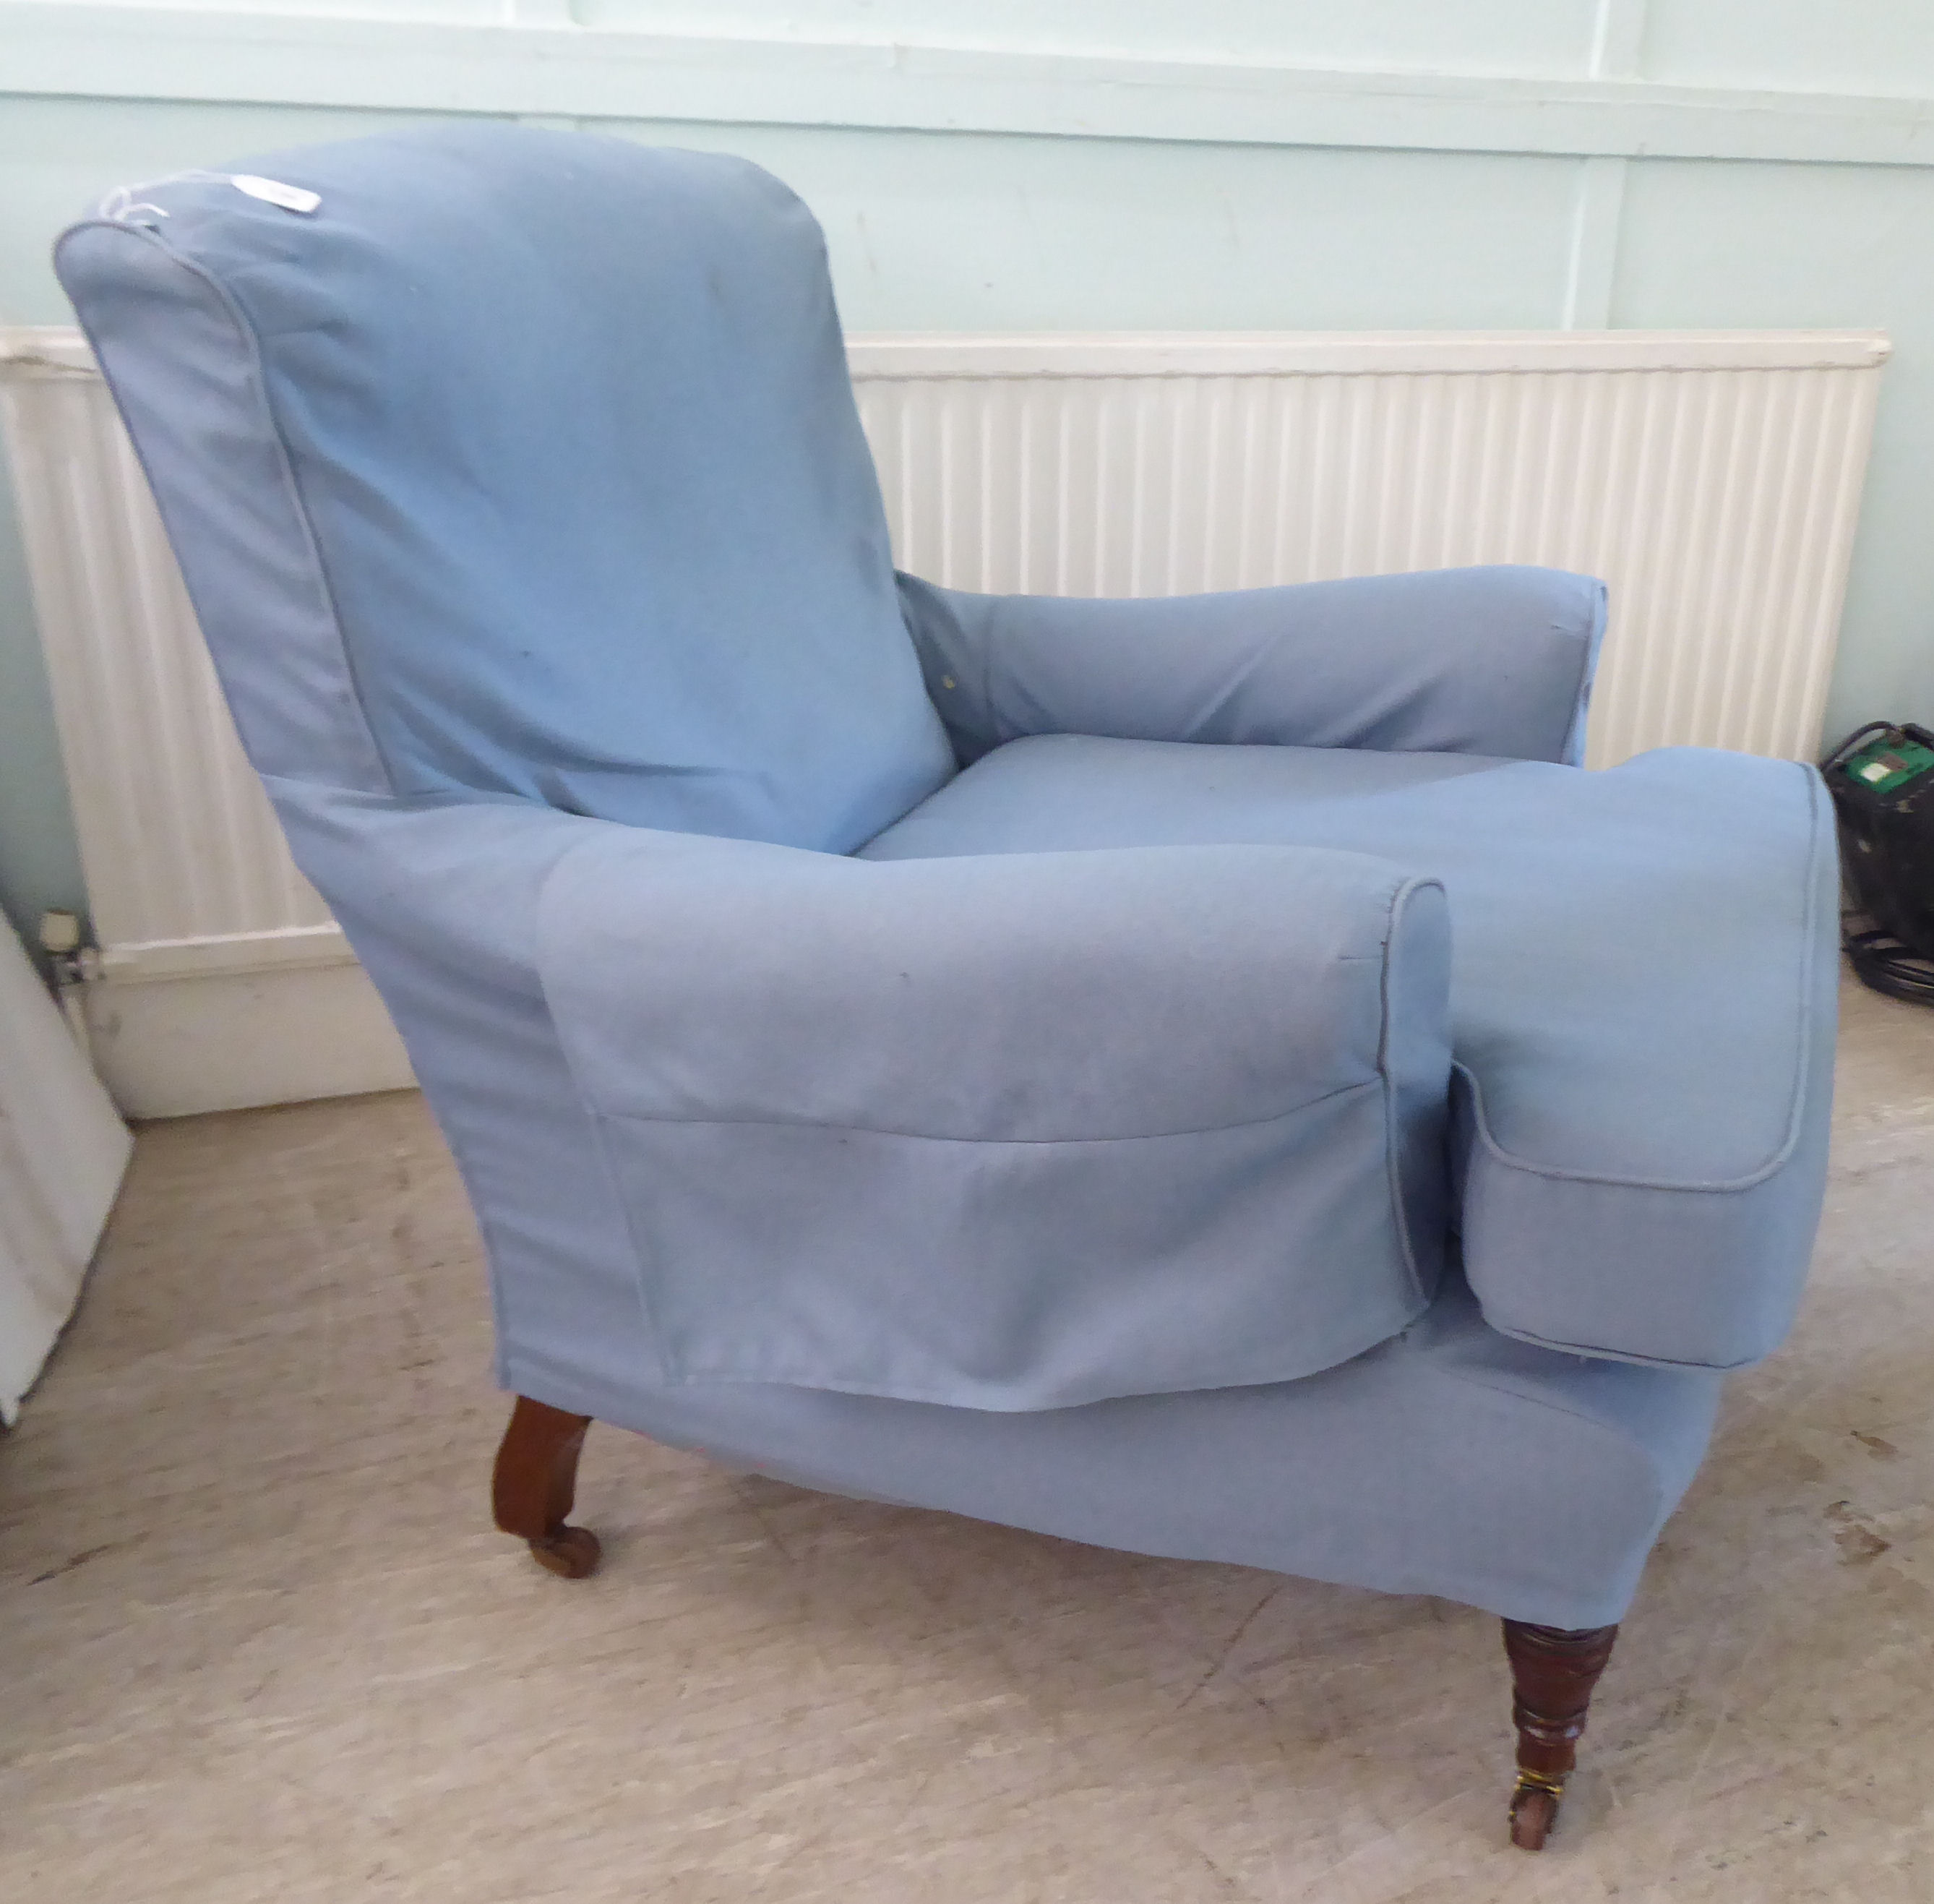 A late Victorian library chair with a level back and enclosed arms, re-upholstered in patterned blue - Image 3 of 4